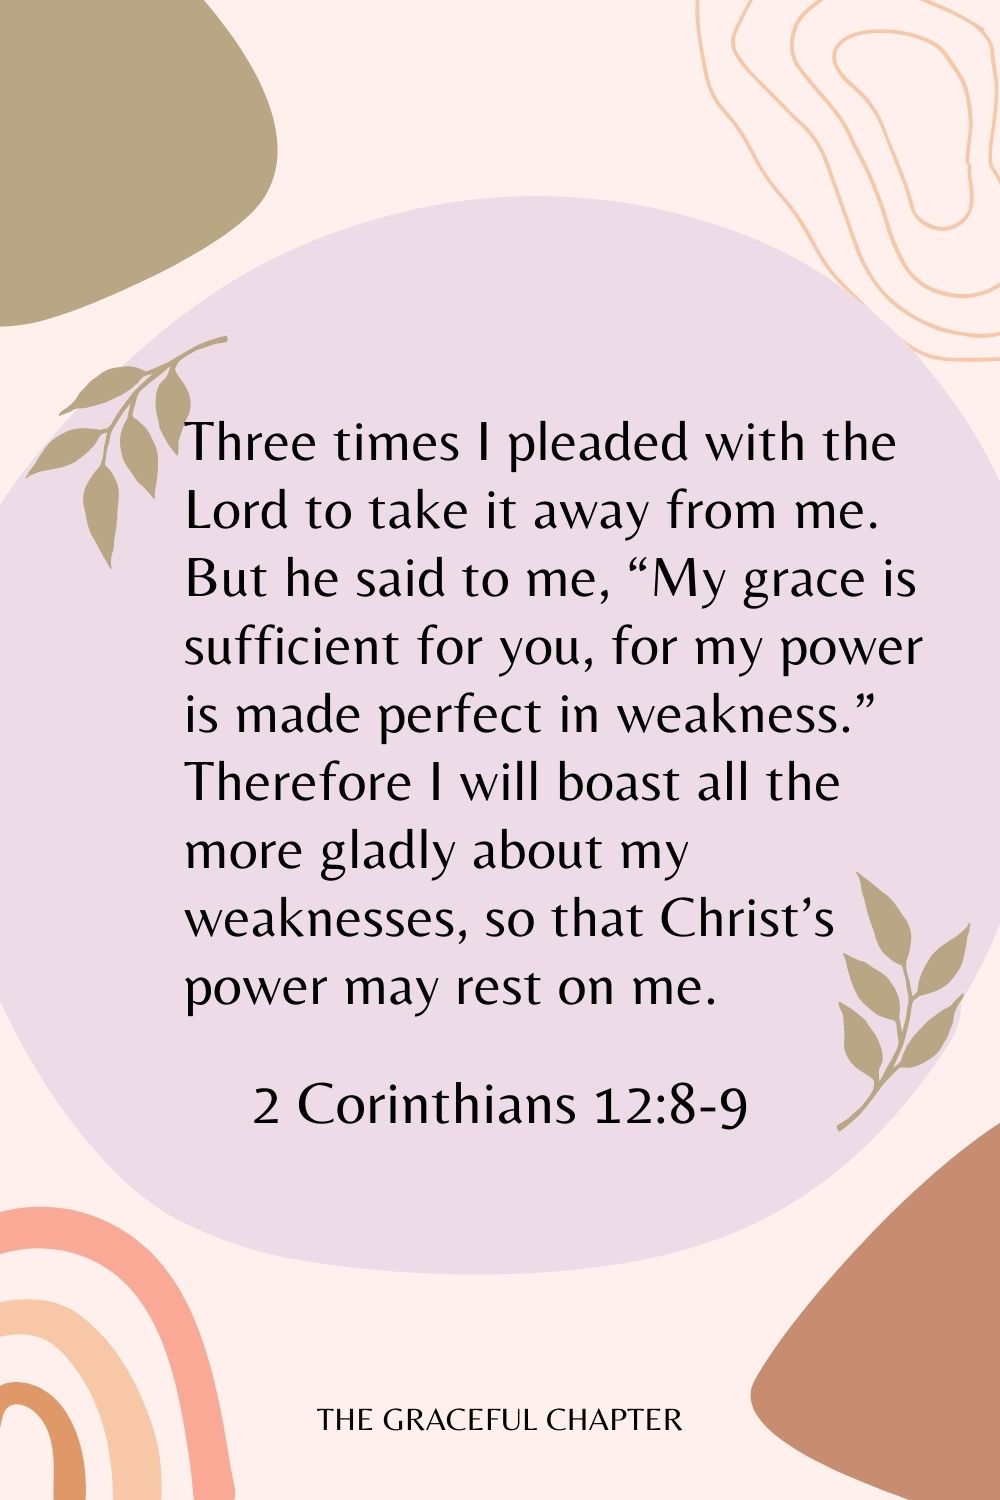 Three times I pleaded with the Lord to take it away from me. But he said to me, “My grace is sufficient for you, for my power is made perfect in weakness.” Therefore I will boast all the more gladly about my weaknesses, so that Christ’s power may rest on me. 2 Corinthians 12:8-9